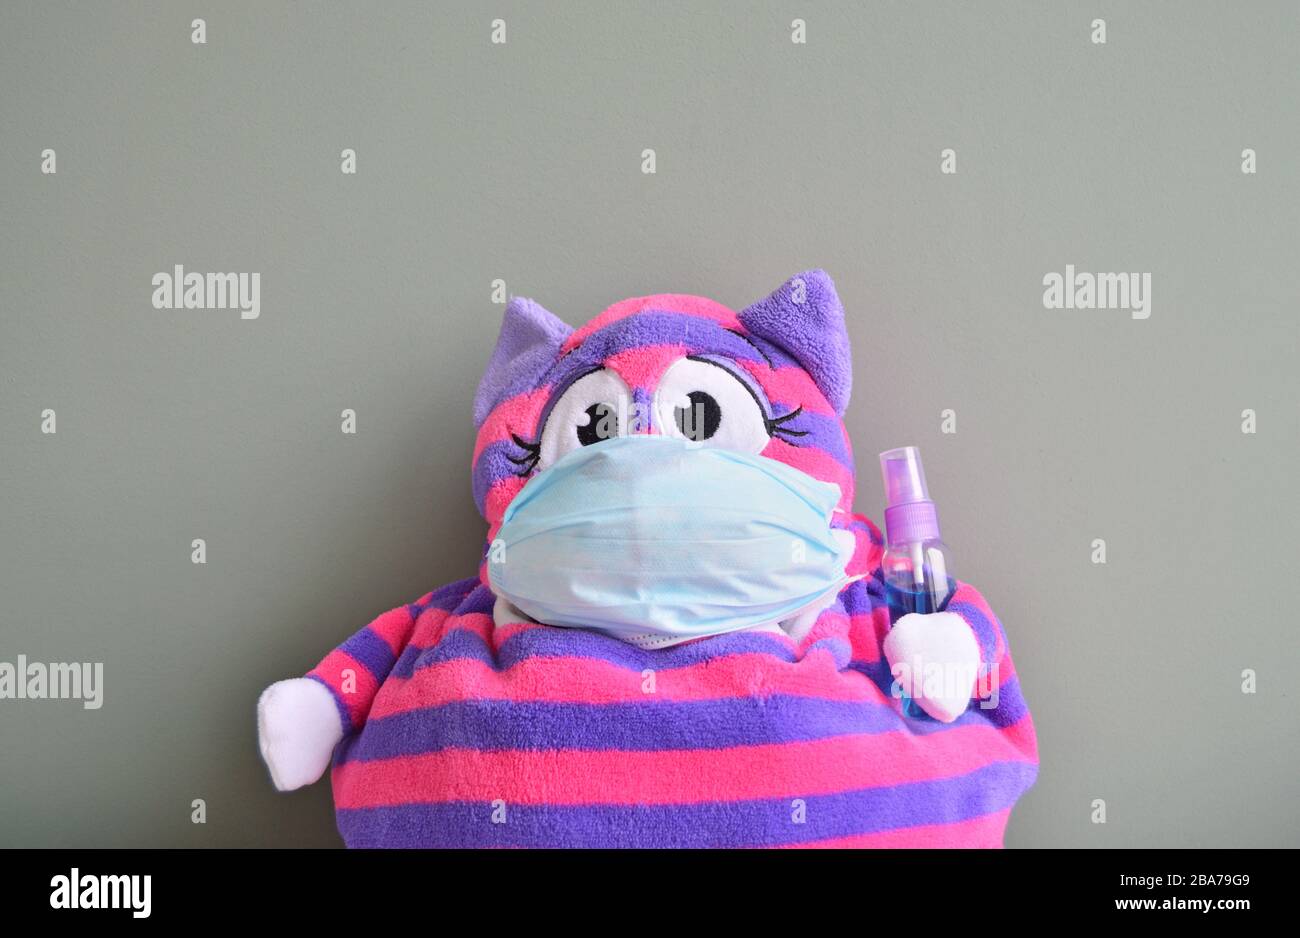 Striped stuffed toy with surgical mask and disinfectant bottle Stock Photo